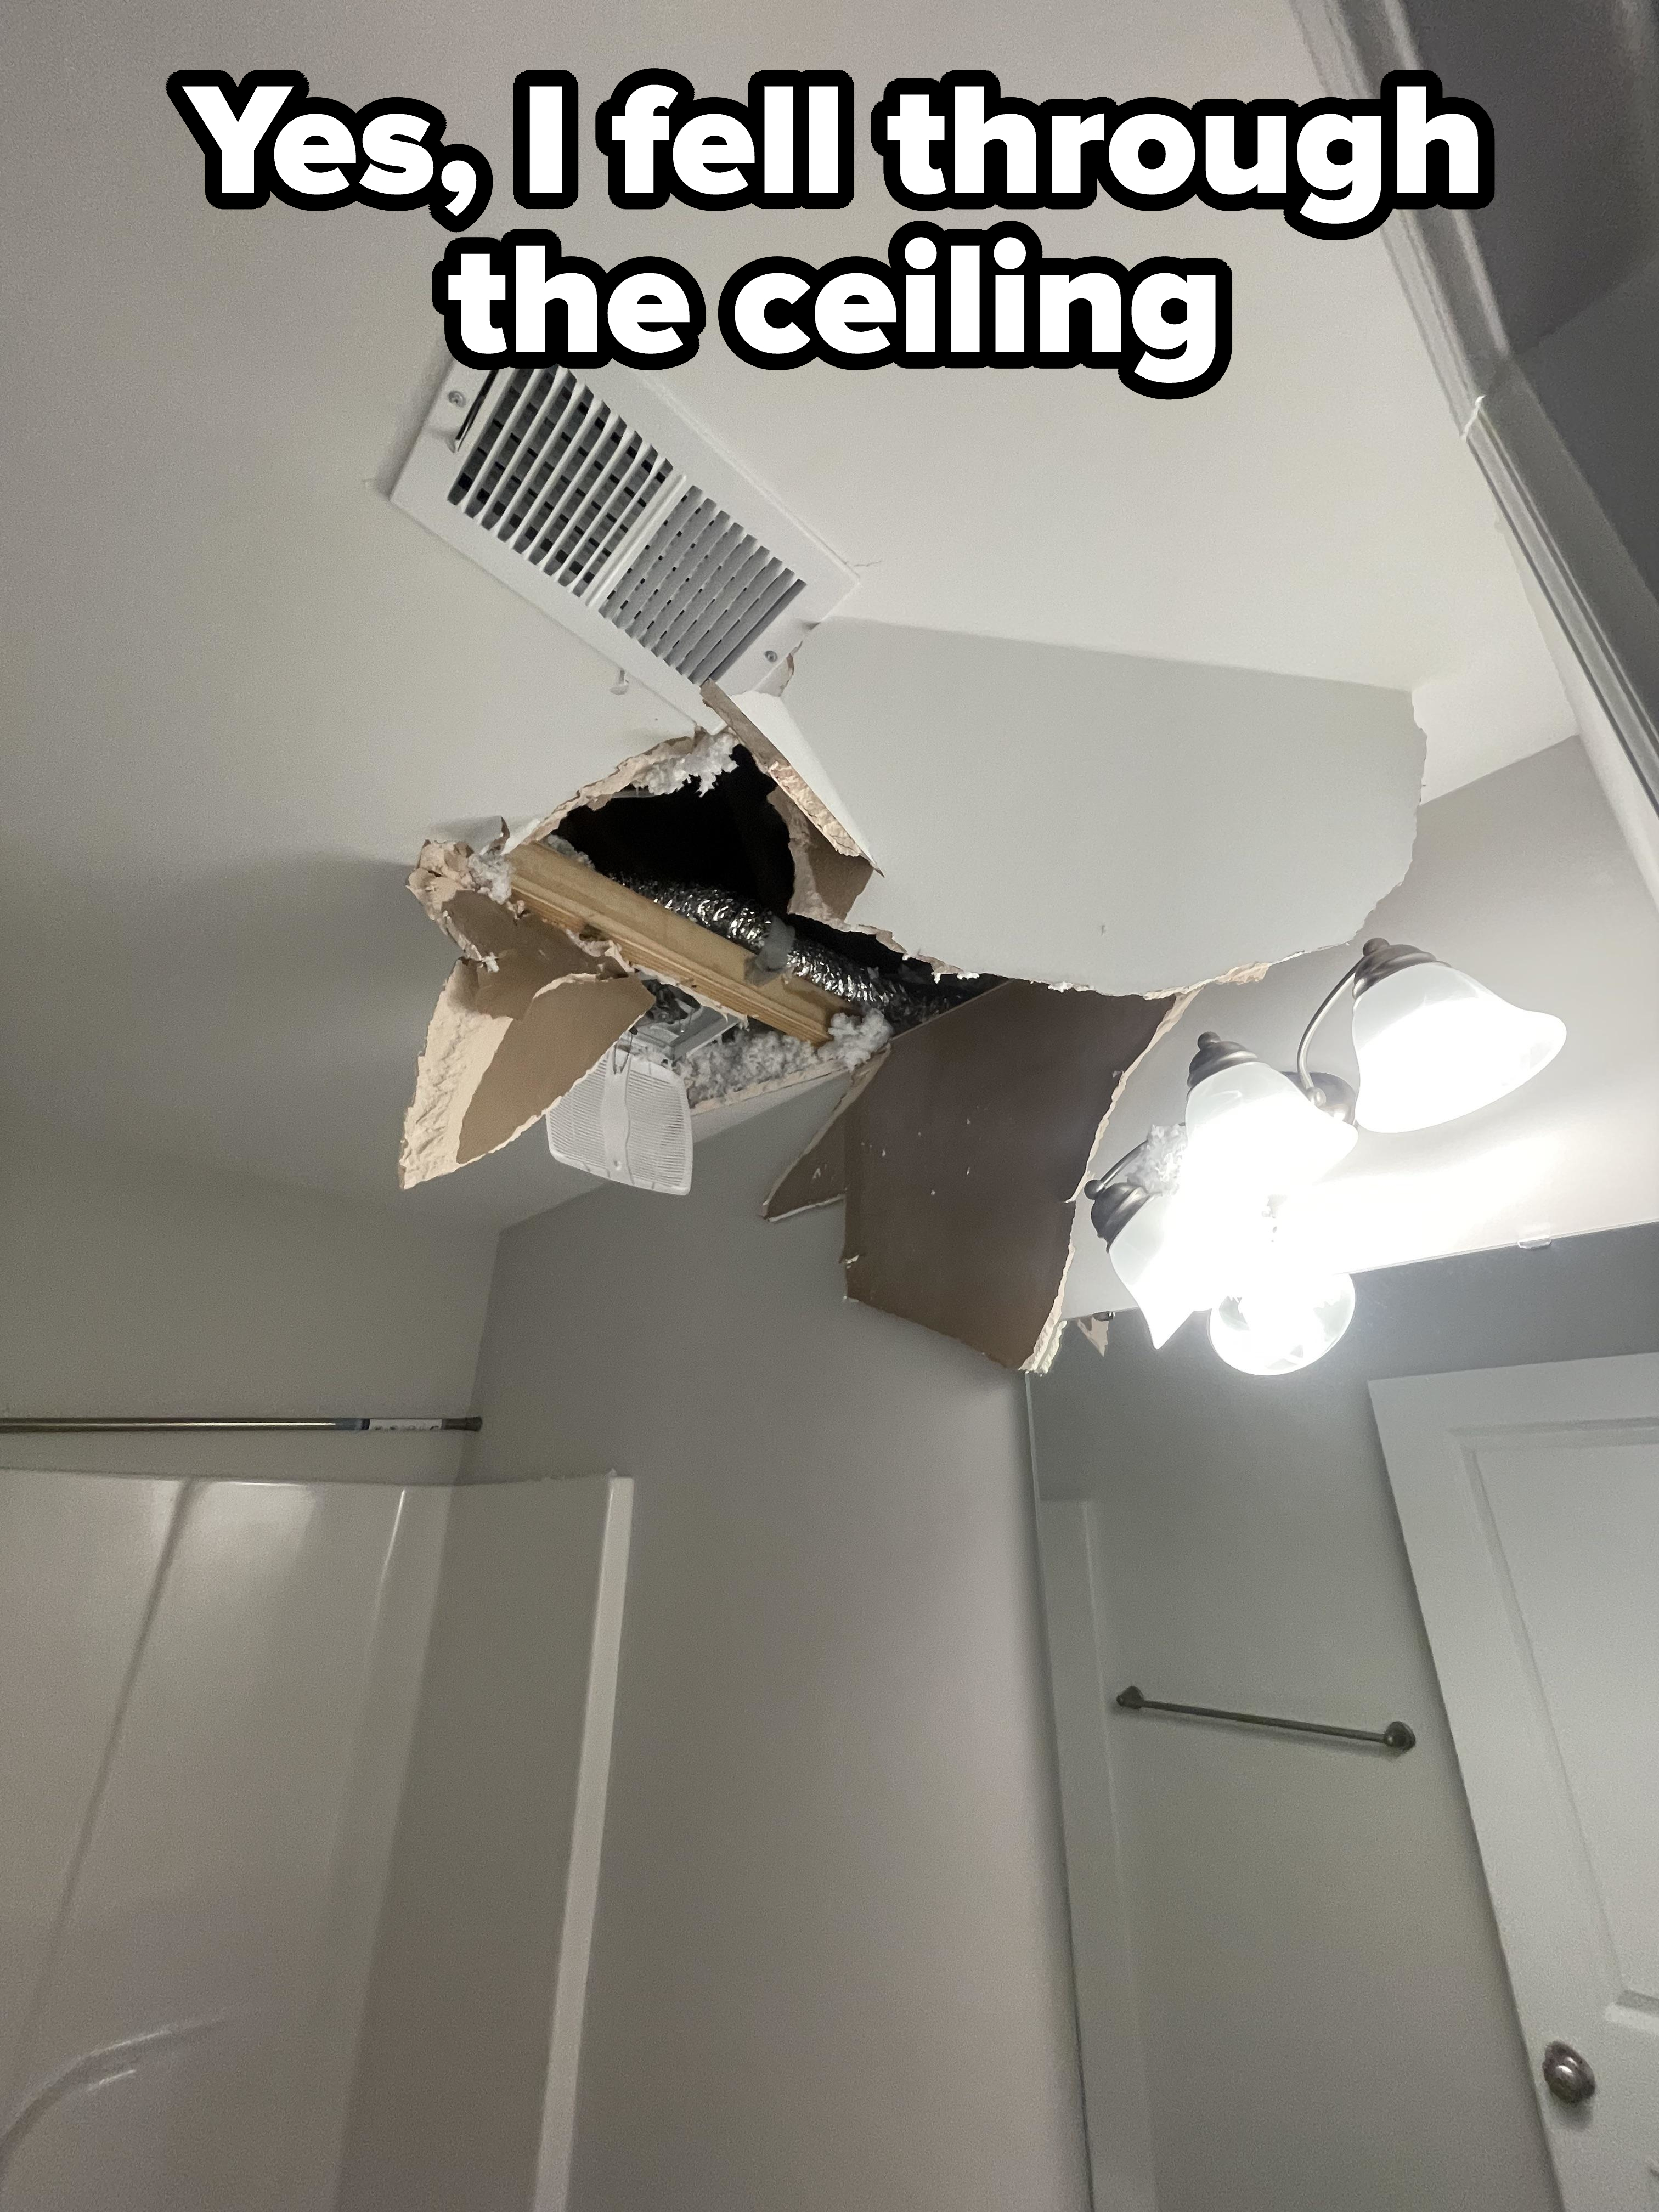 A huge hole in the ceiling with &quot;Yes, I fell through the ceiling&quot; caption